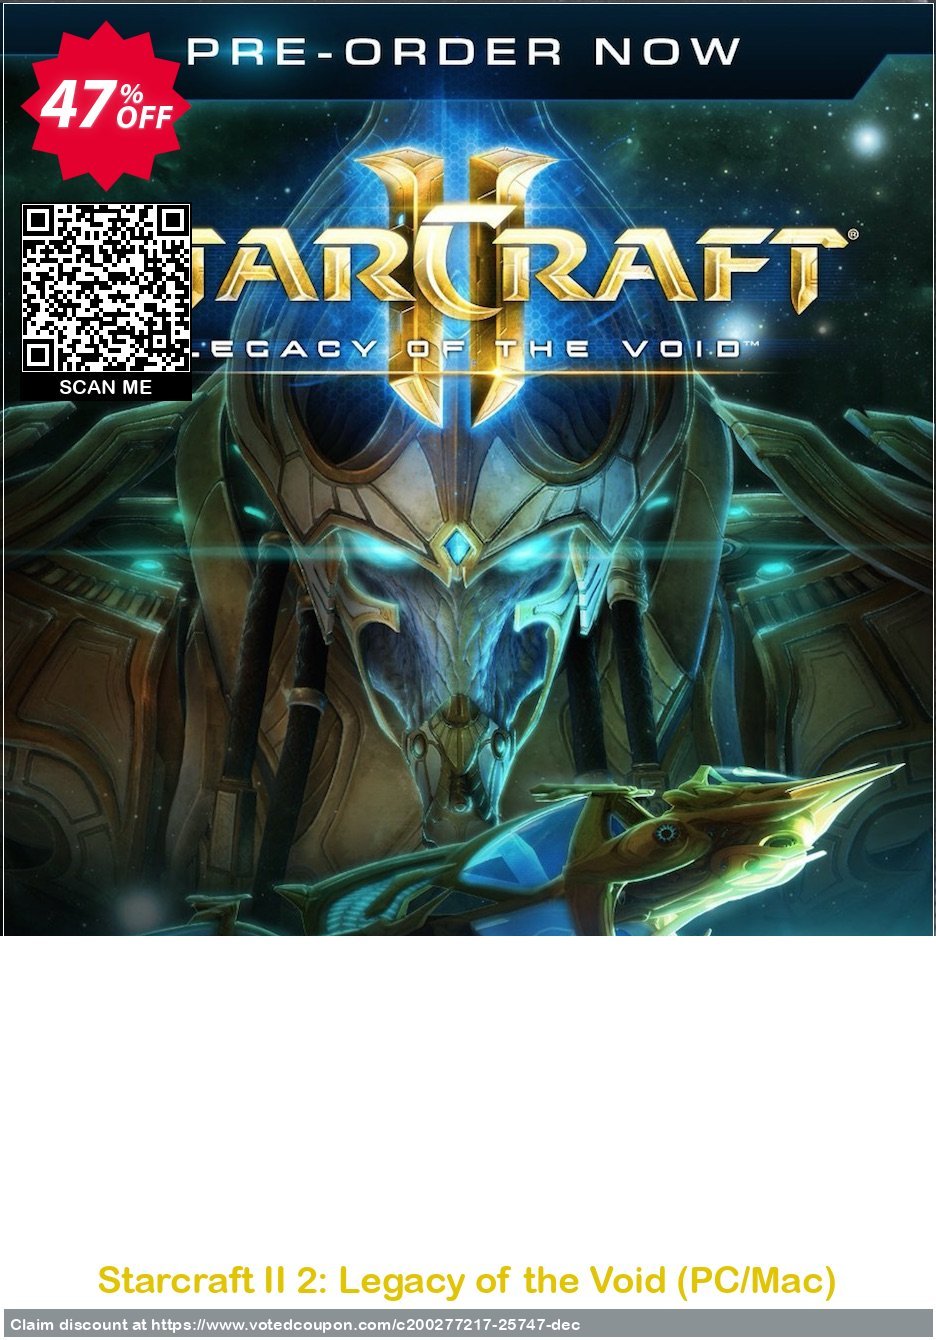 Starcraft II 2: Legacy of the Void, PC/MAC  Coupon Code Apr 2024, 47% OFF - VotedCoupon